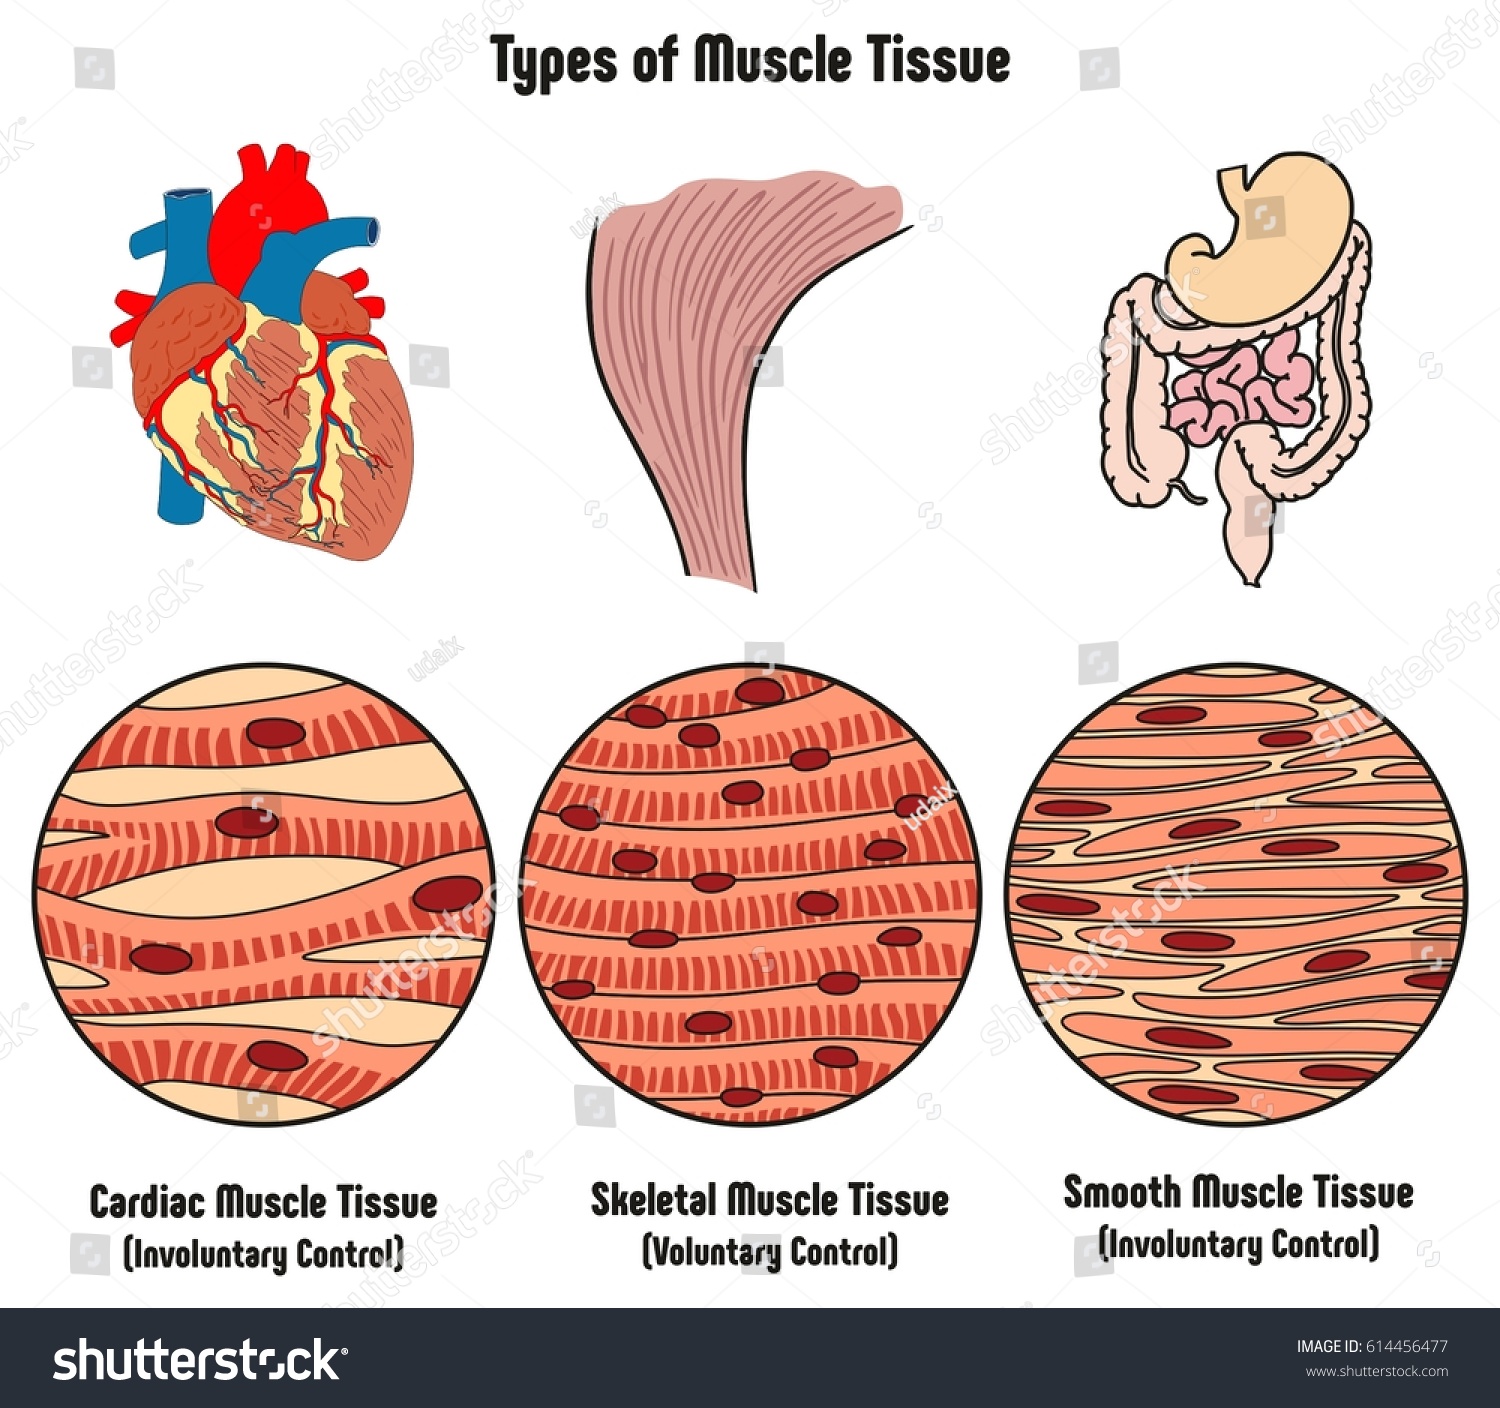 Examples of human tissue